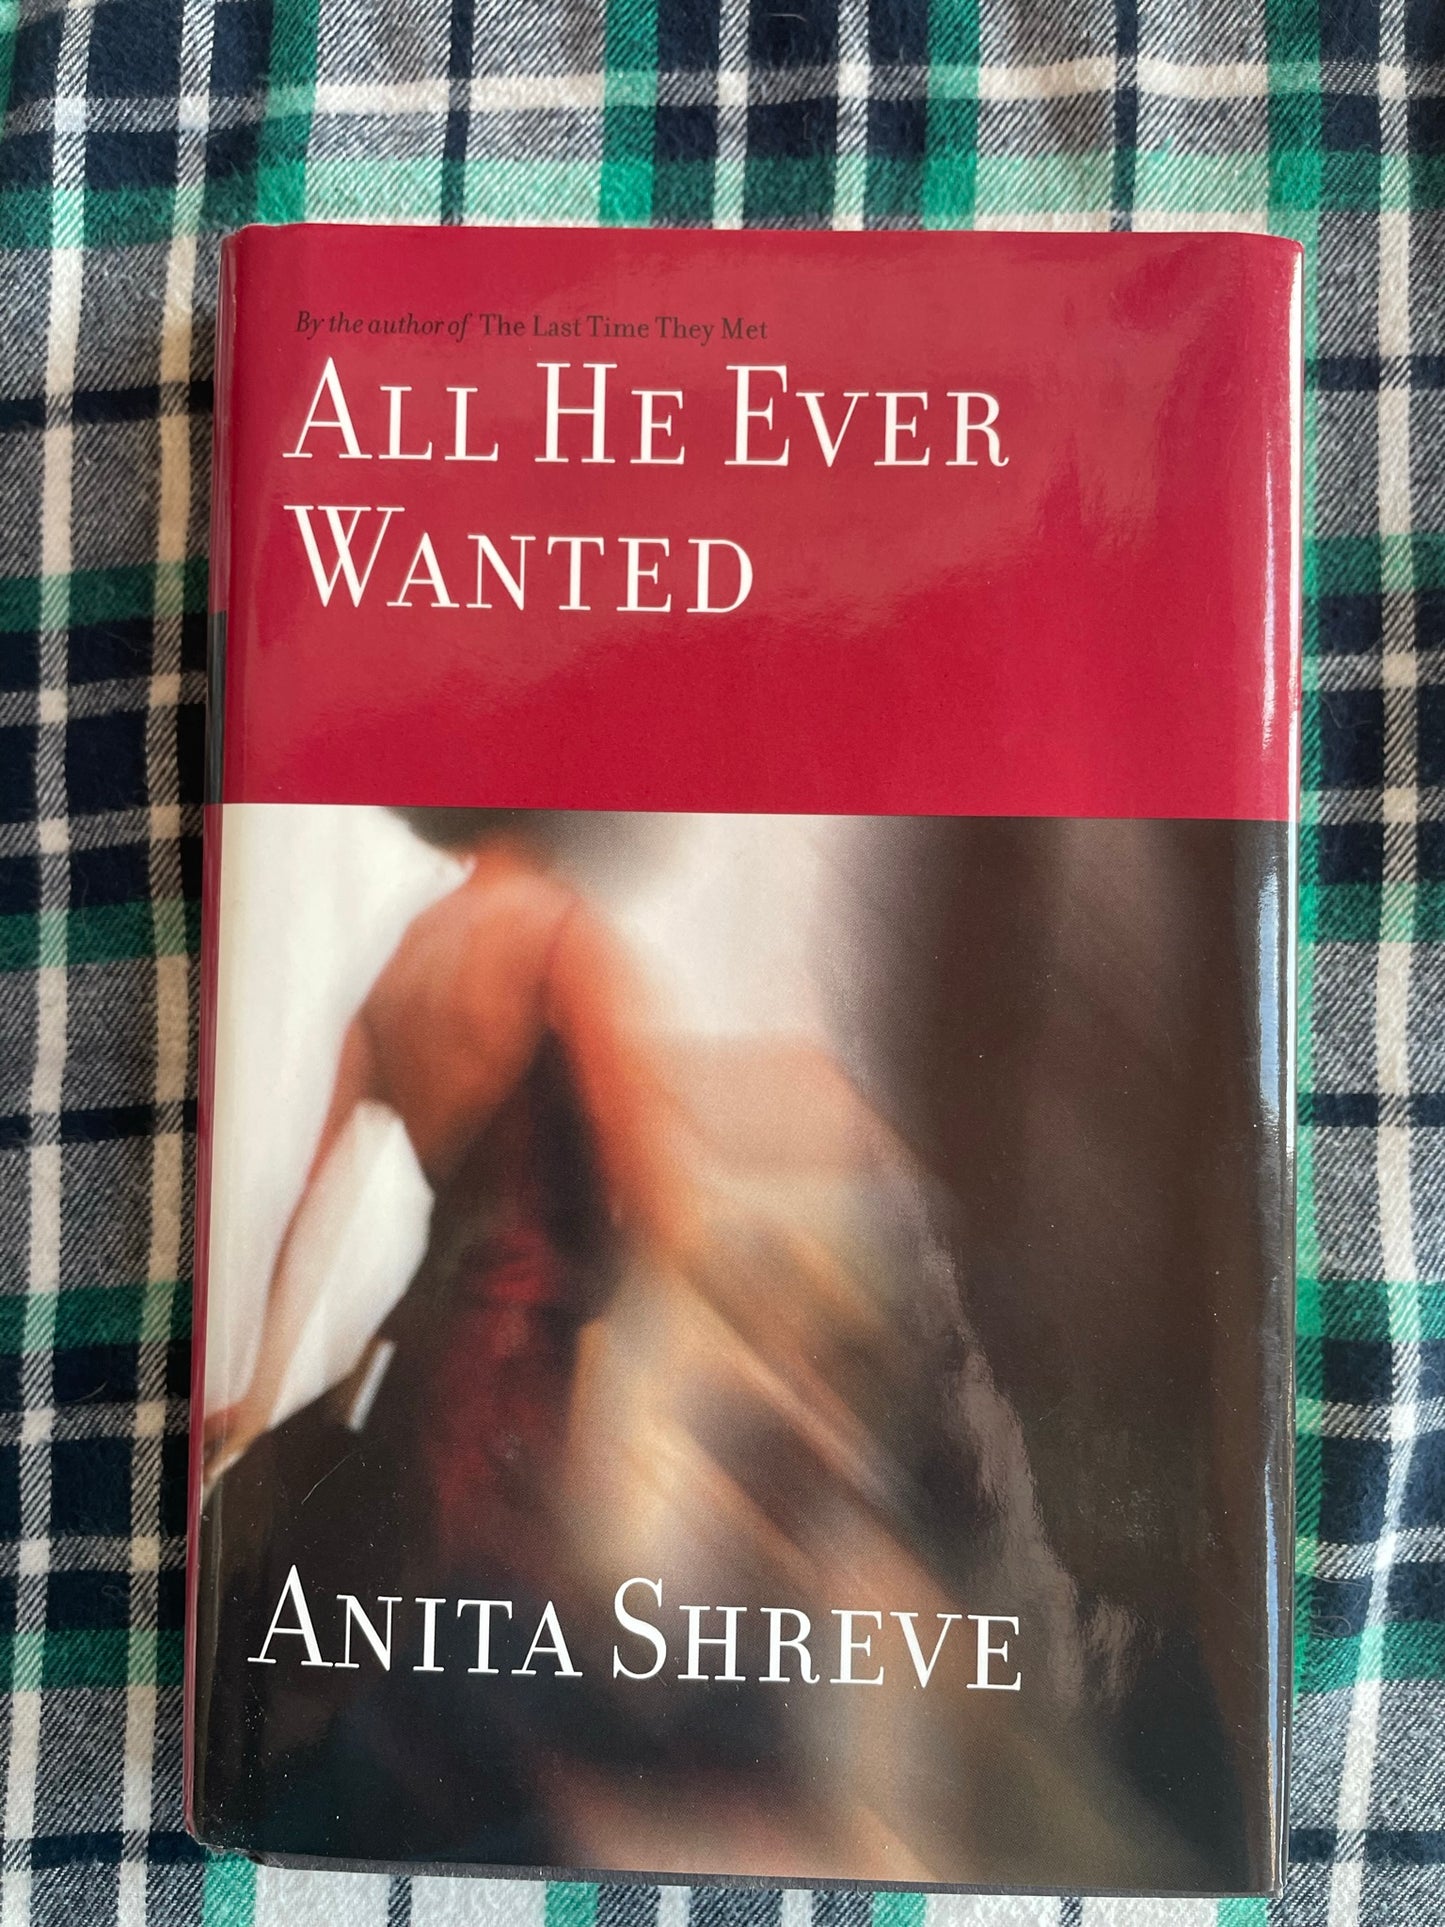 Shreve, Anita: All He Ever Wanted (First Edition, 2003)